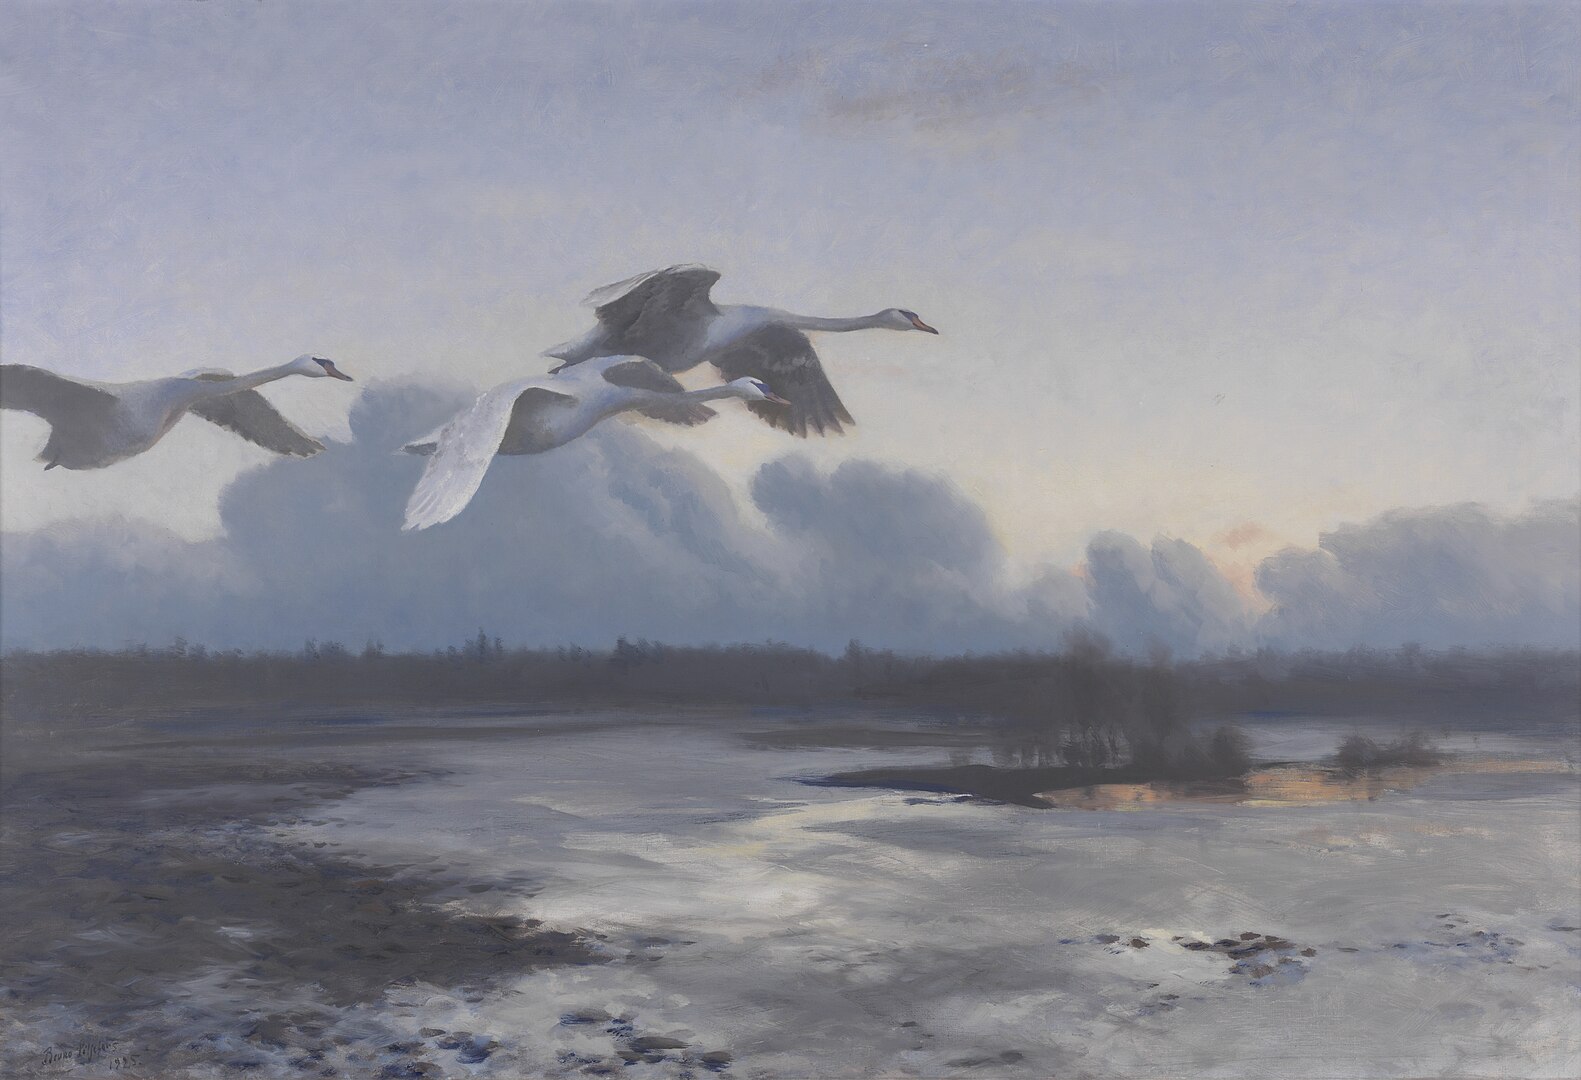 Three swans flying together above a lake